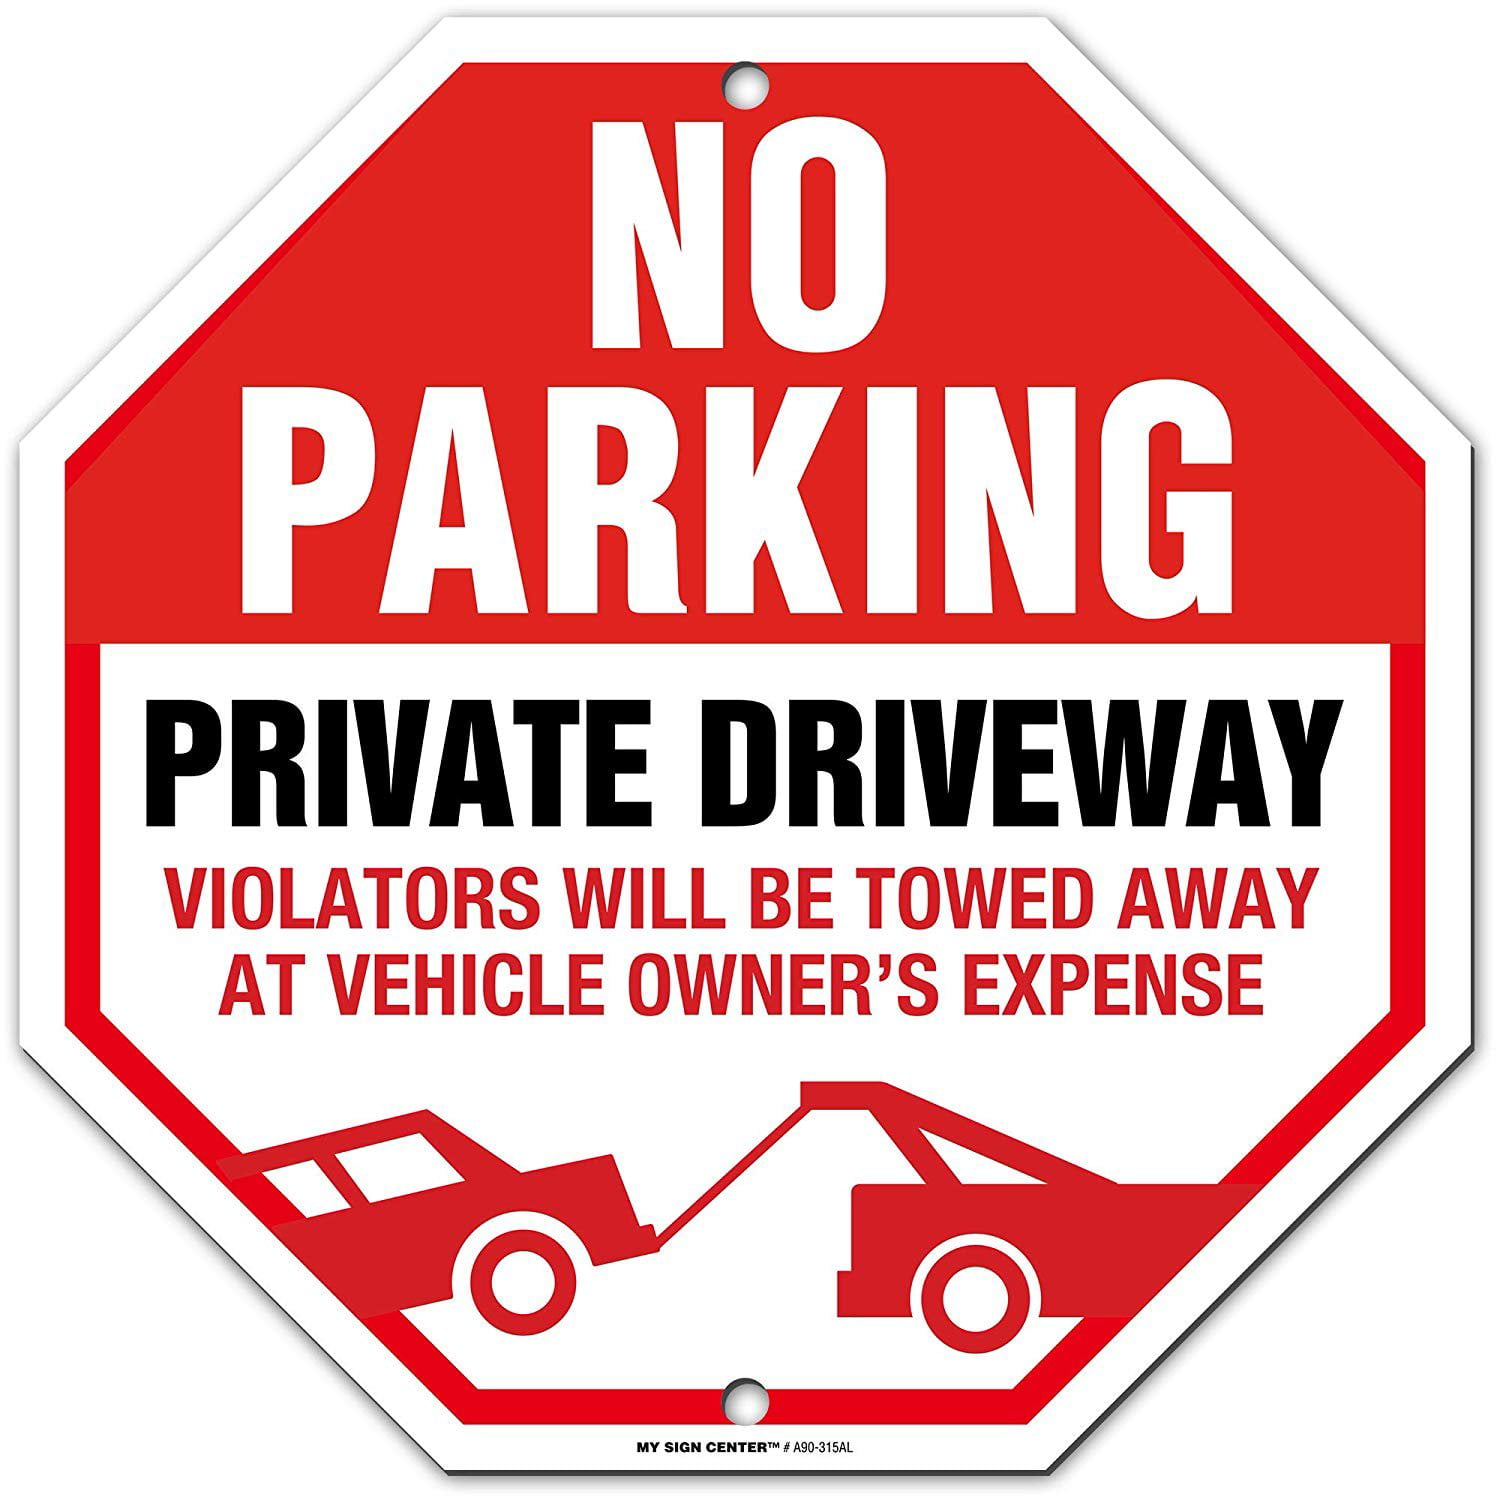 12"x18" STREET SIGN TOWED AT OWNER'S EXPENSE NO PARKING 